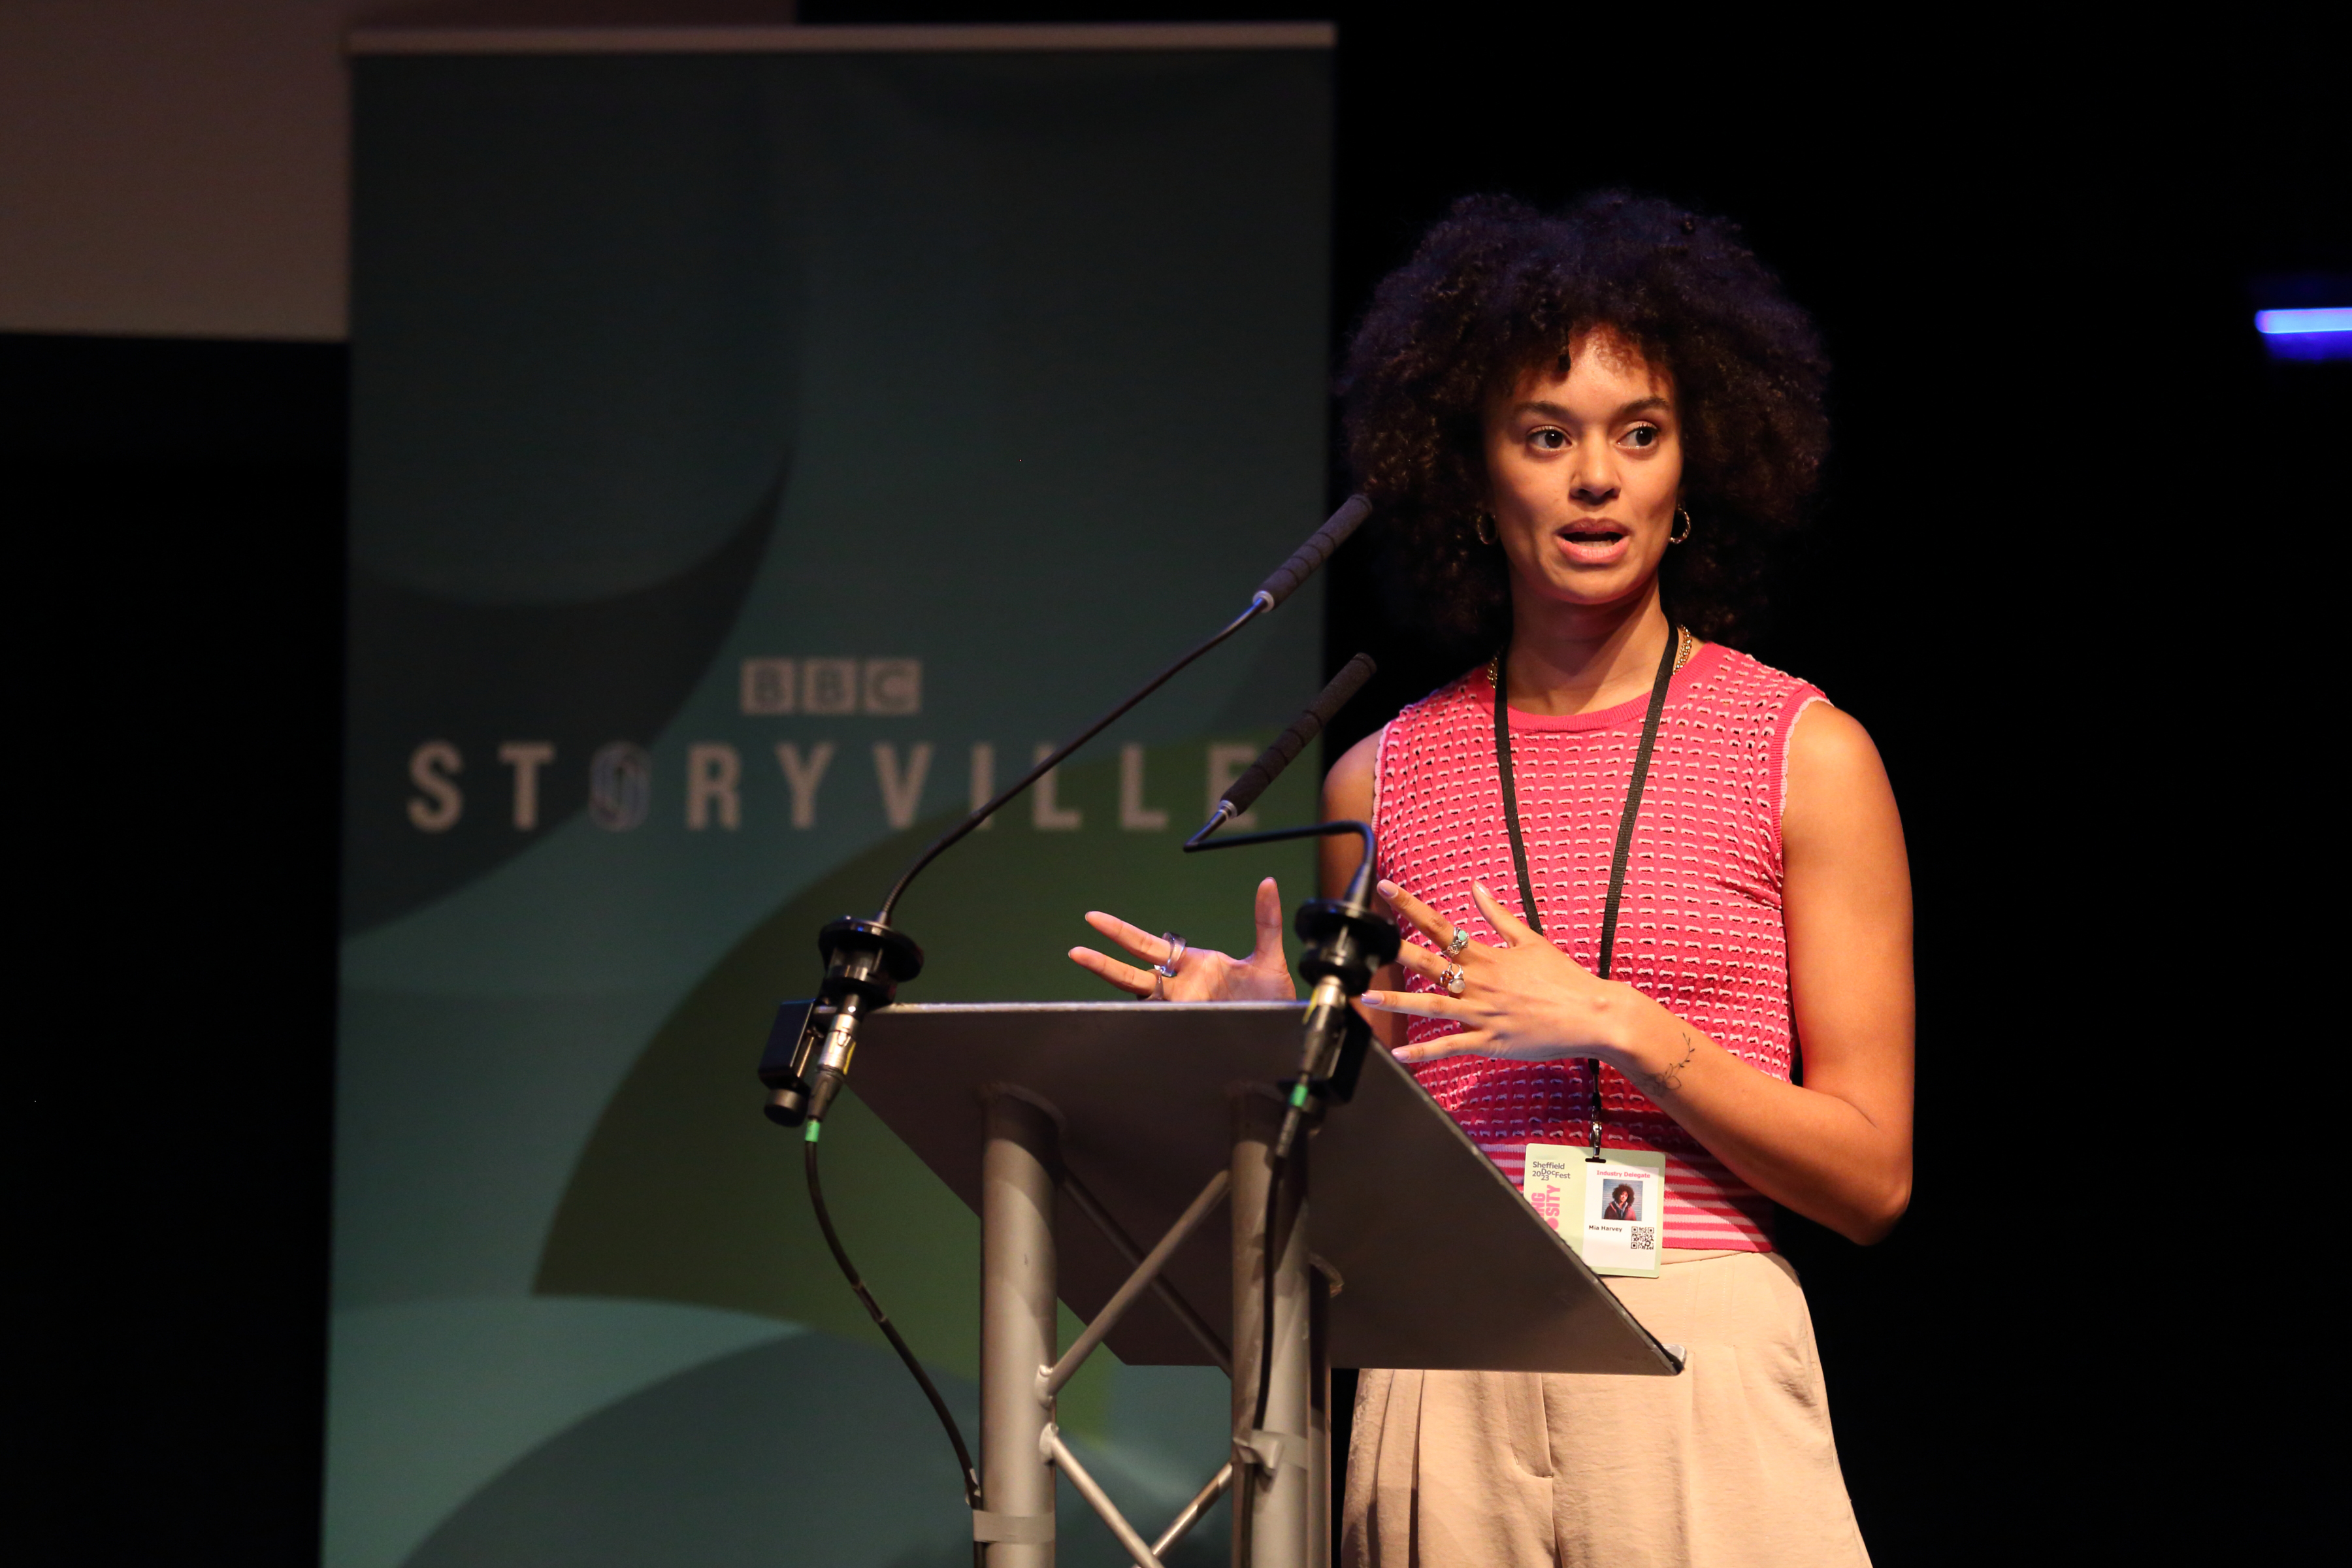 To the right of the image, a woman wearing a red top stands at a lectern with her hands waving in front of her expressively. Behind her is a pull up banner which says 'BBC Storyville'. 